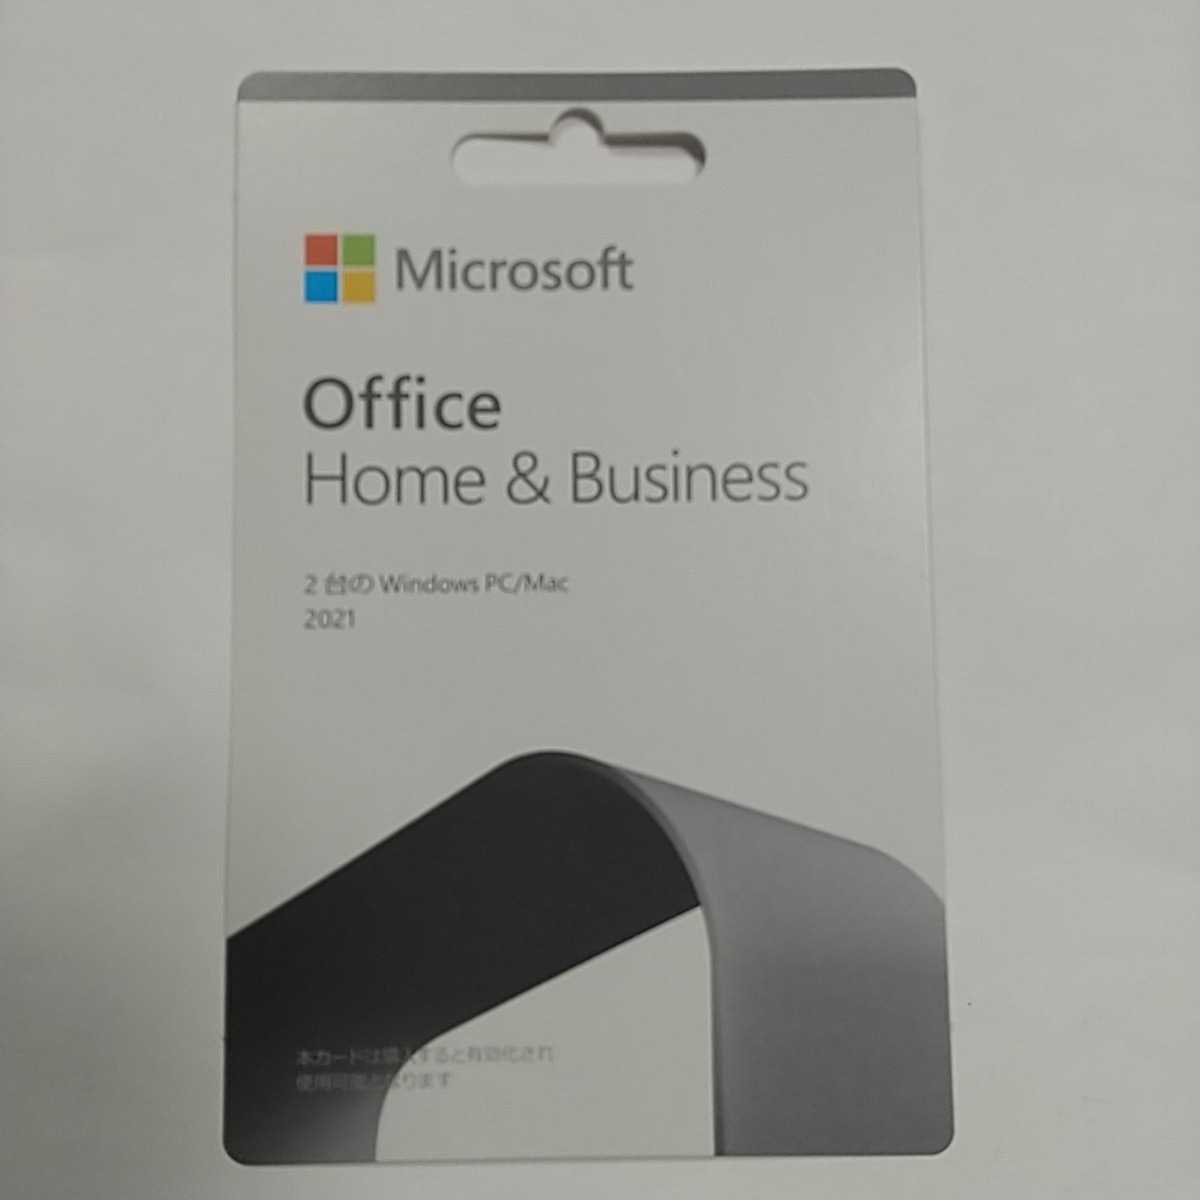 Microsoft Office Home and Business 2021 マイクロソフトオフィス 2021　2台用